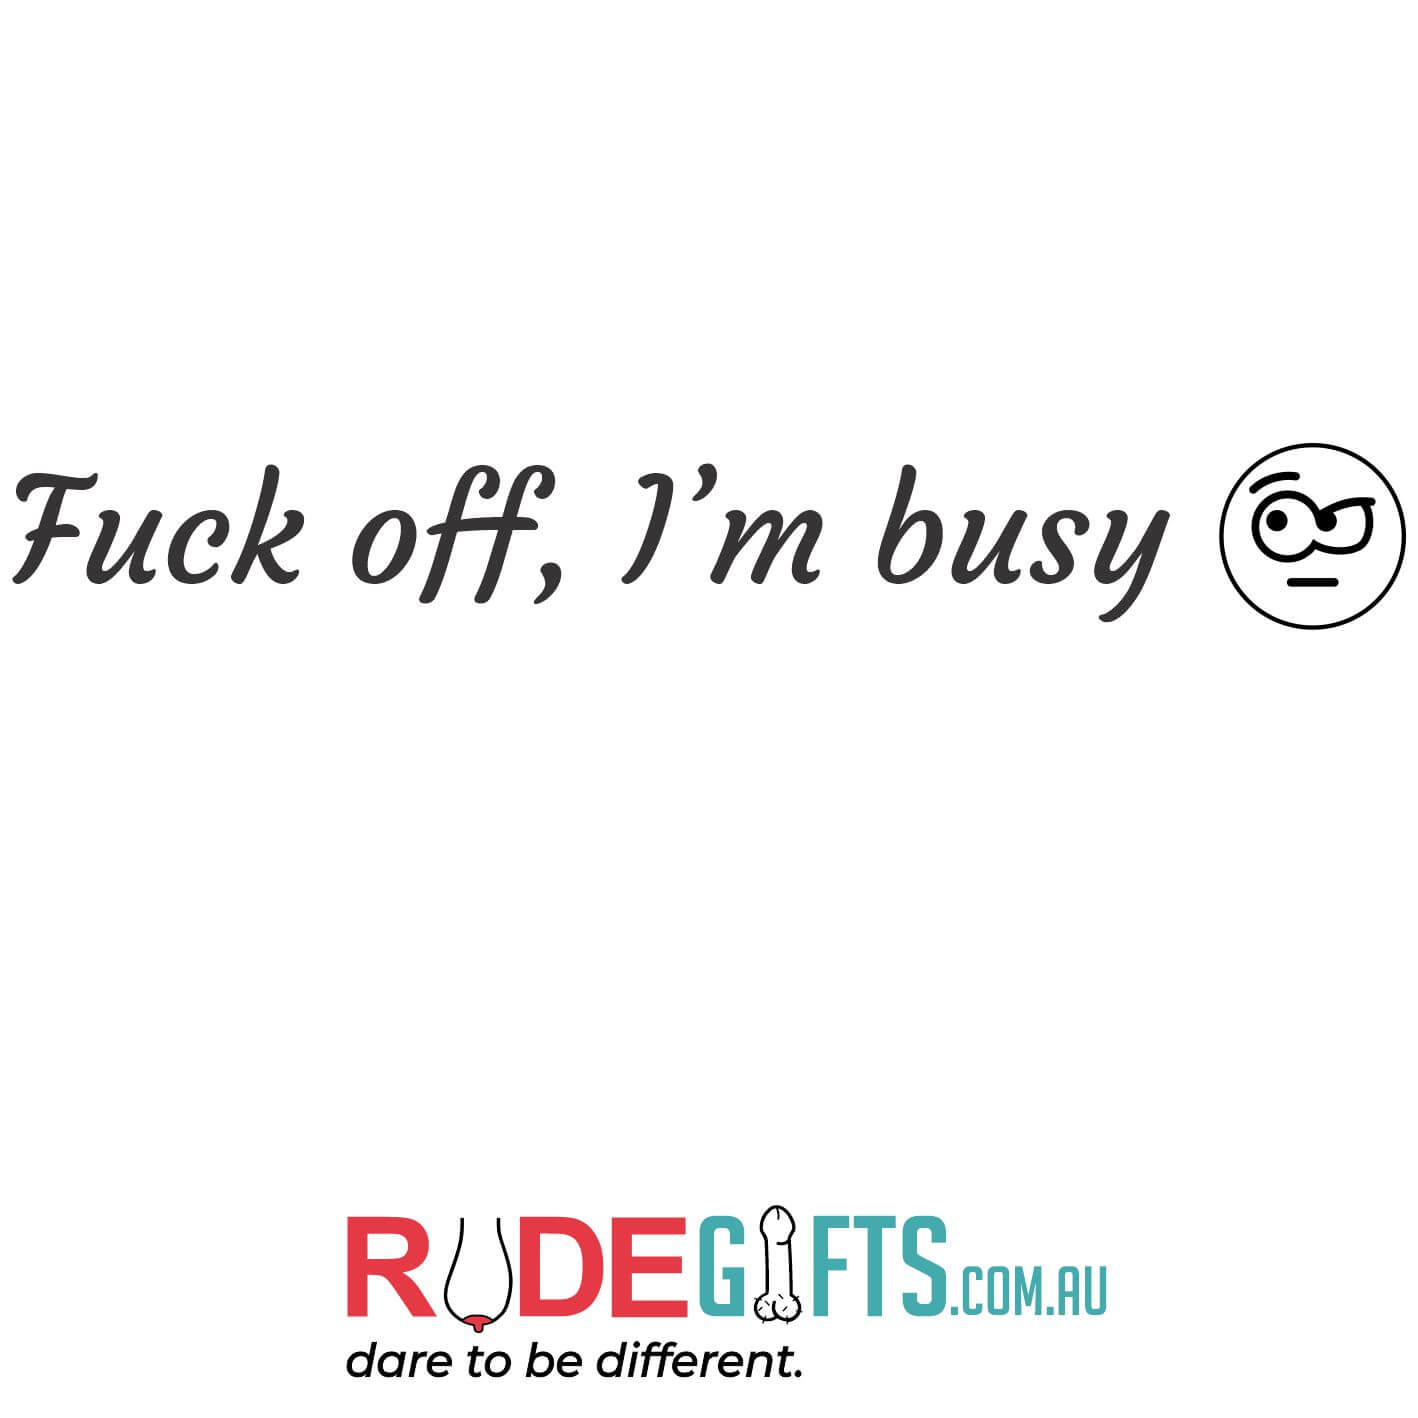 Fuck off, I'm busy - 0